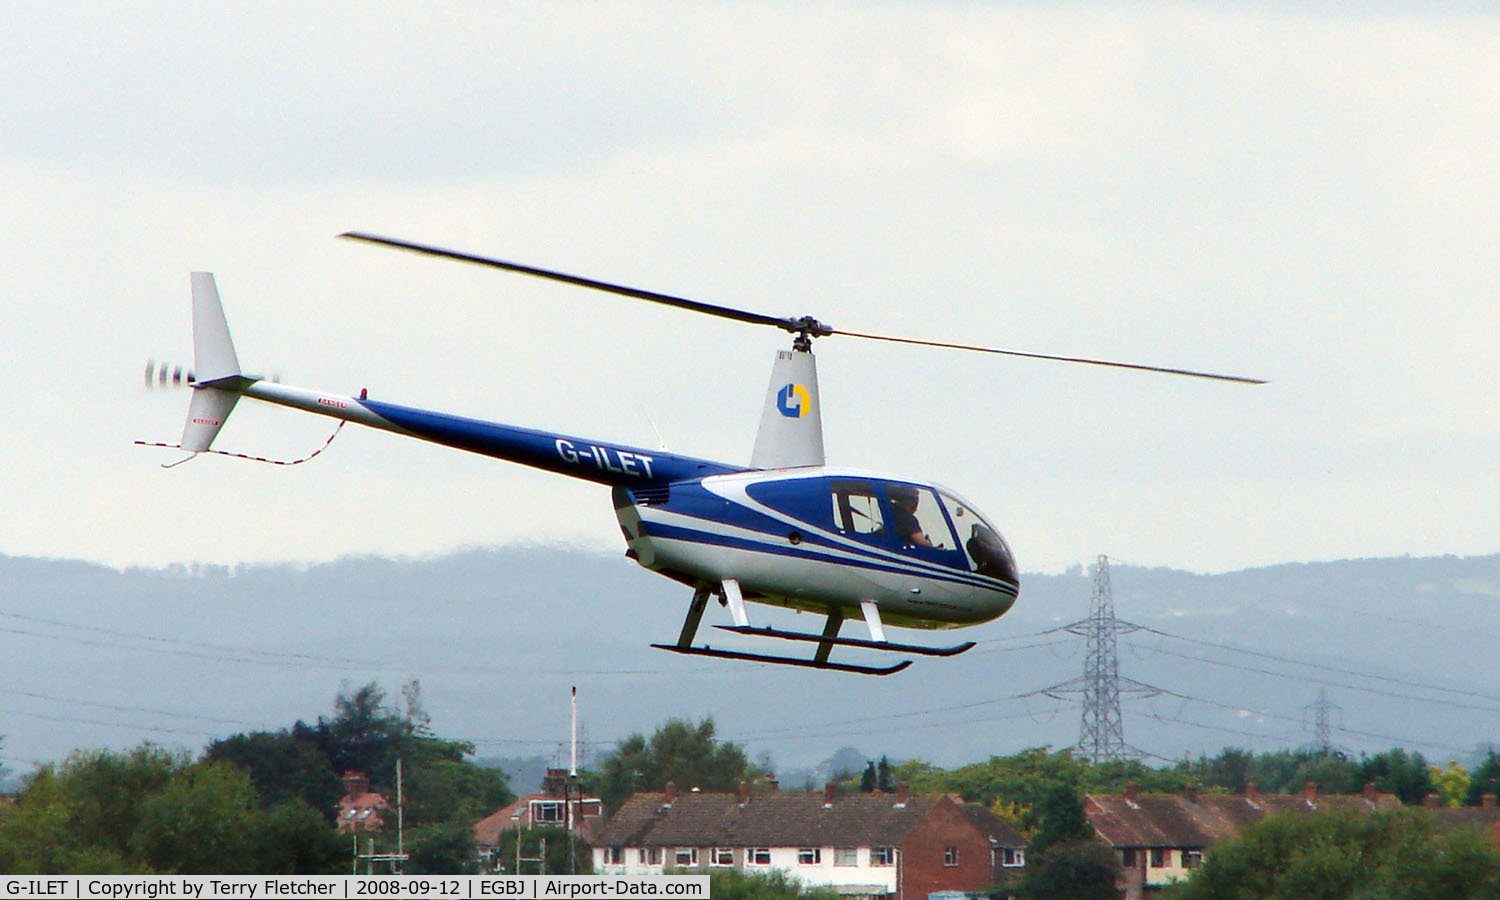 G-ILET, 2005 Robinson R44 II C/N 10789, R44 Raven noted at Gloucestershire Airport  UK in Sept 2008